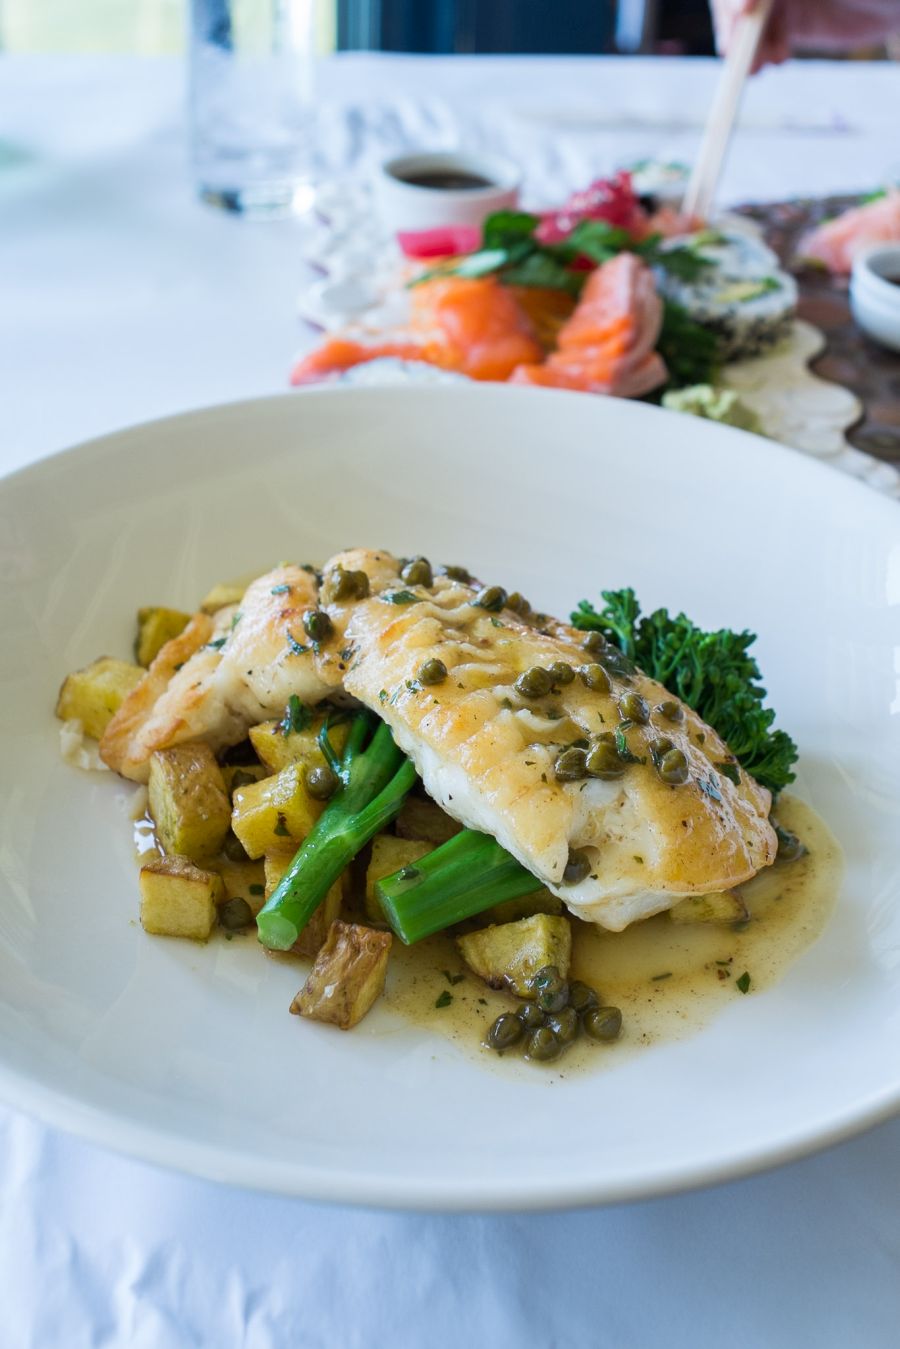 Fish special - groper gently  grilled, with broccolini and skillet potatoes with lemon caper sauce (AU$52)